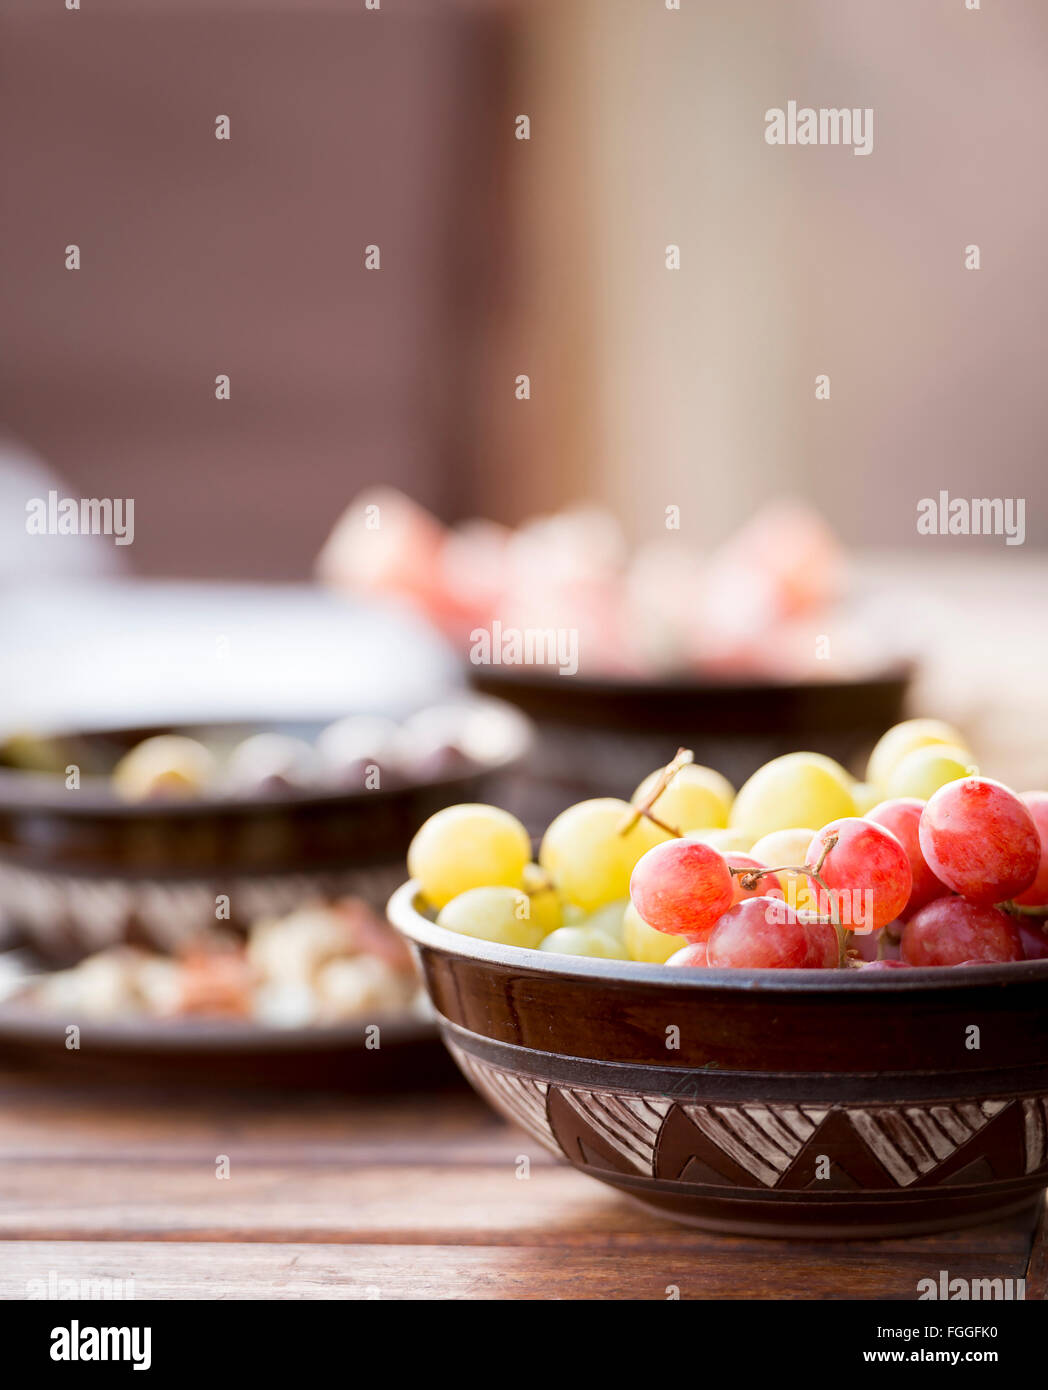 Classic antipasto food typical of the Mediterranean including grapes, olives, salami in shallow focus Stock Photo